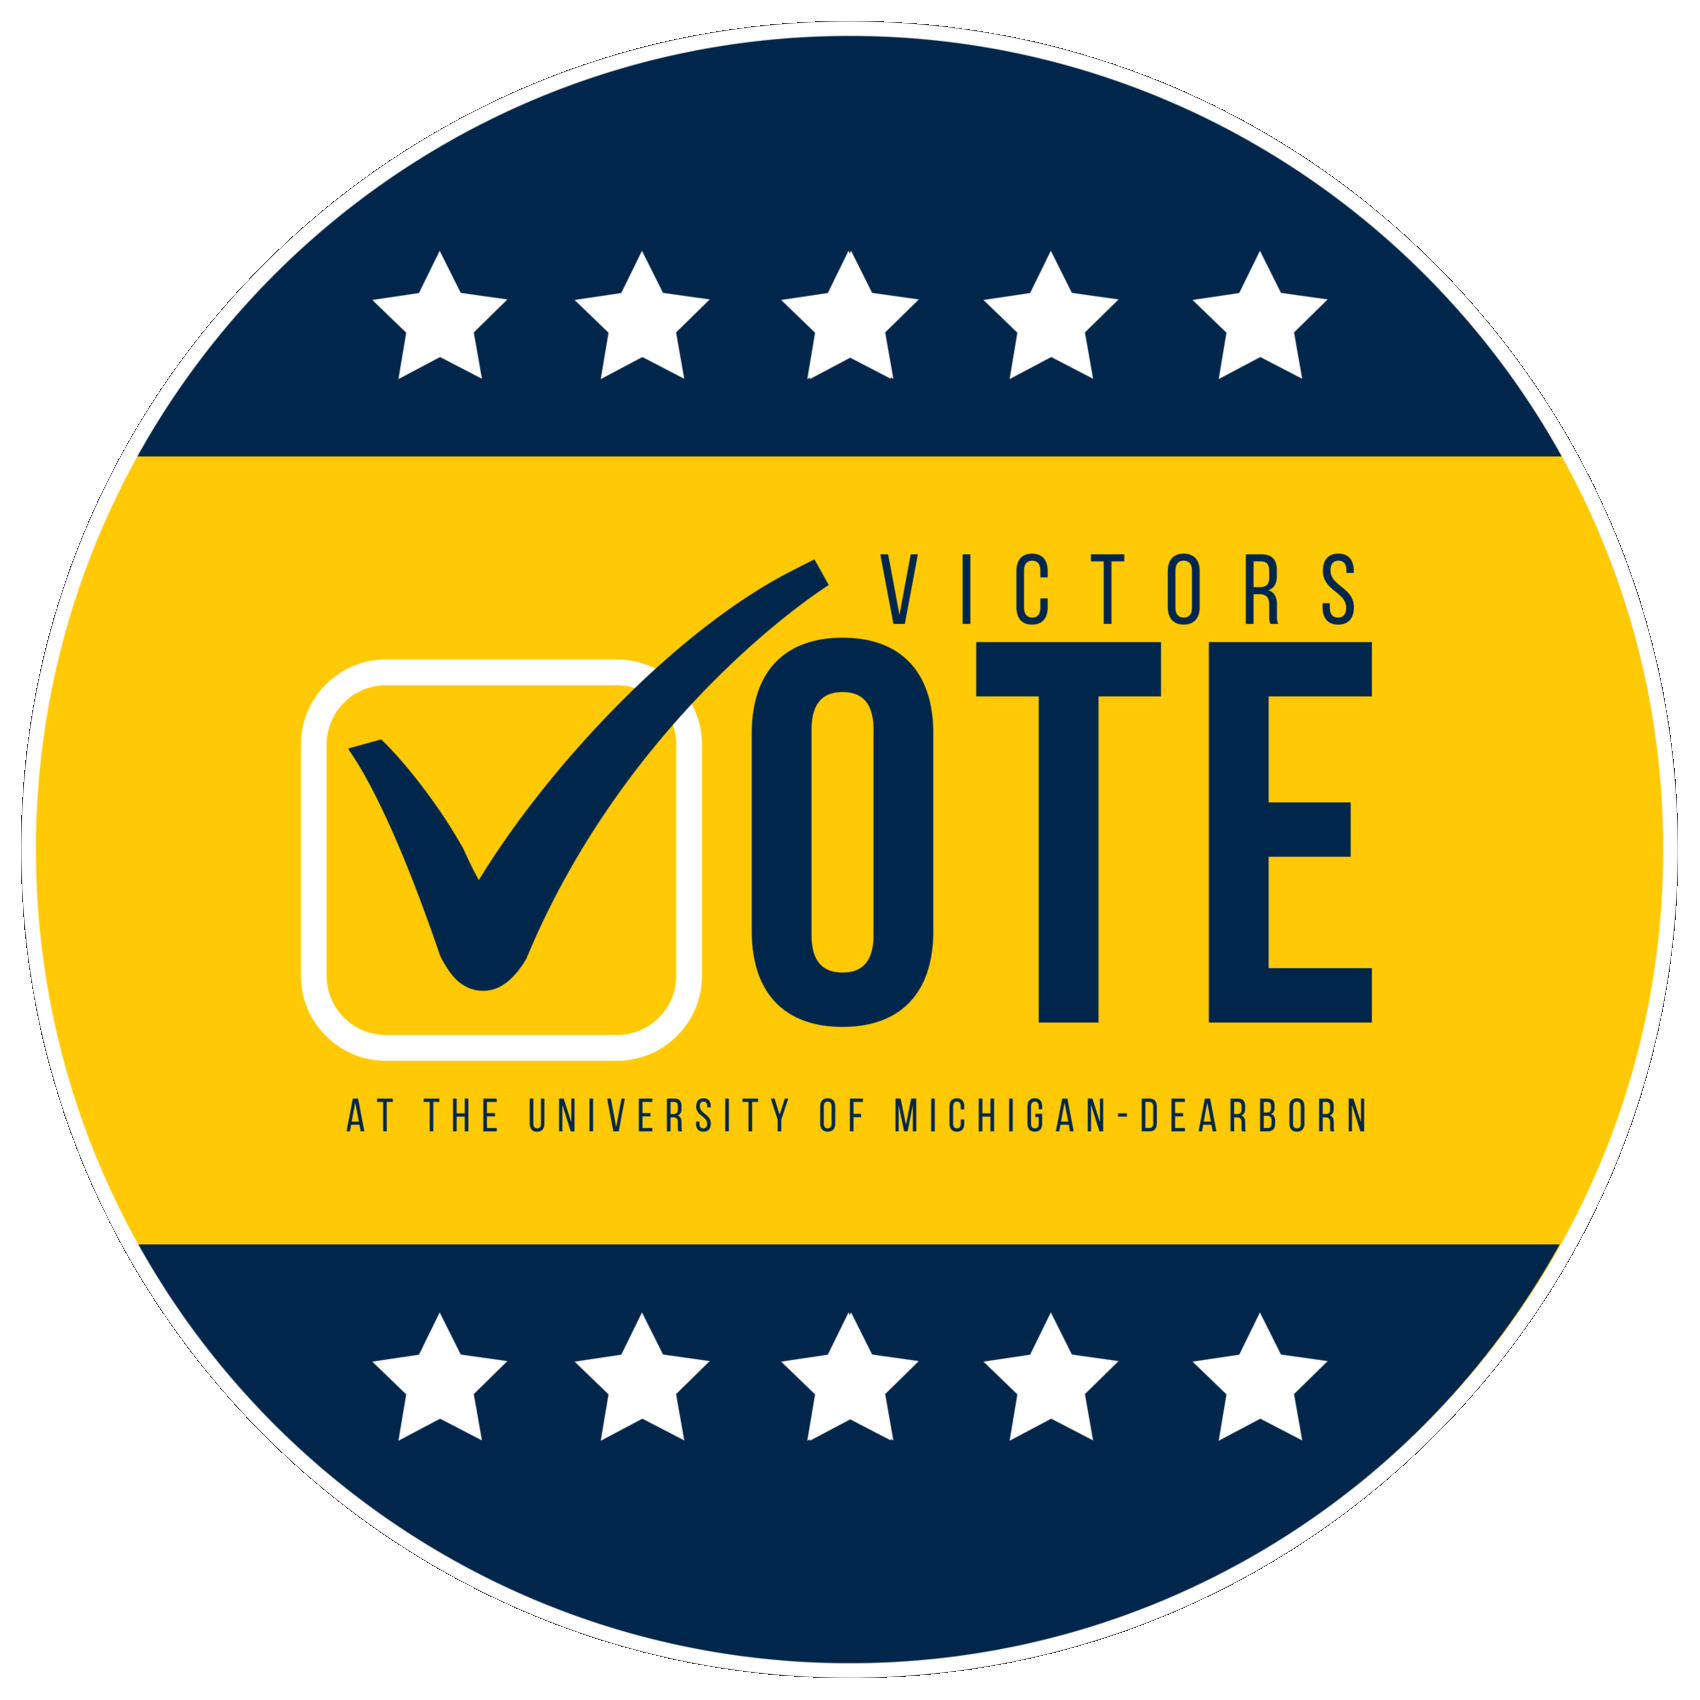 Graphic of Victors Vote at the University of Michigan-Dearborn logo